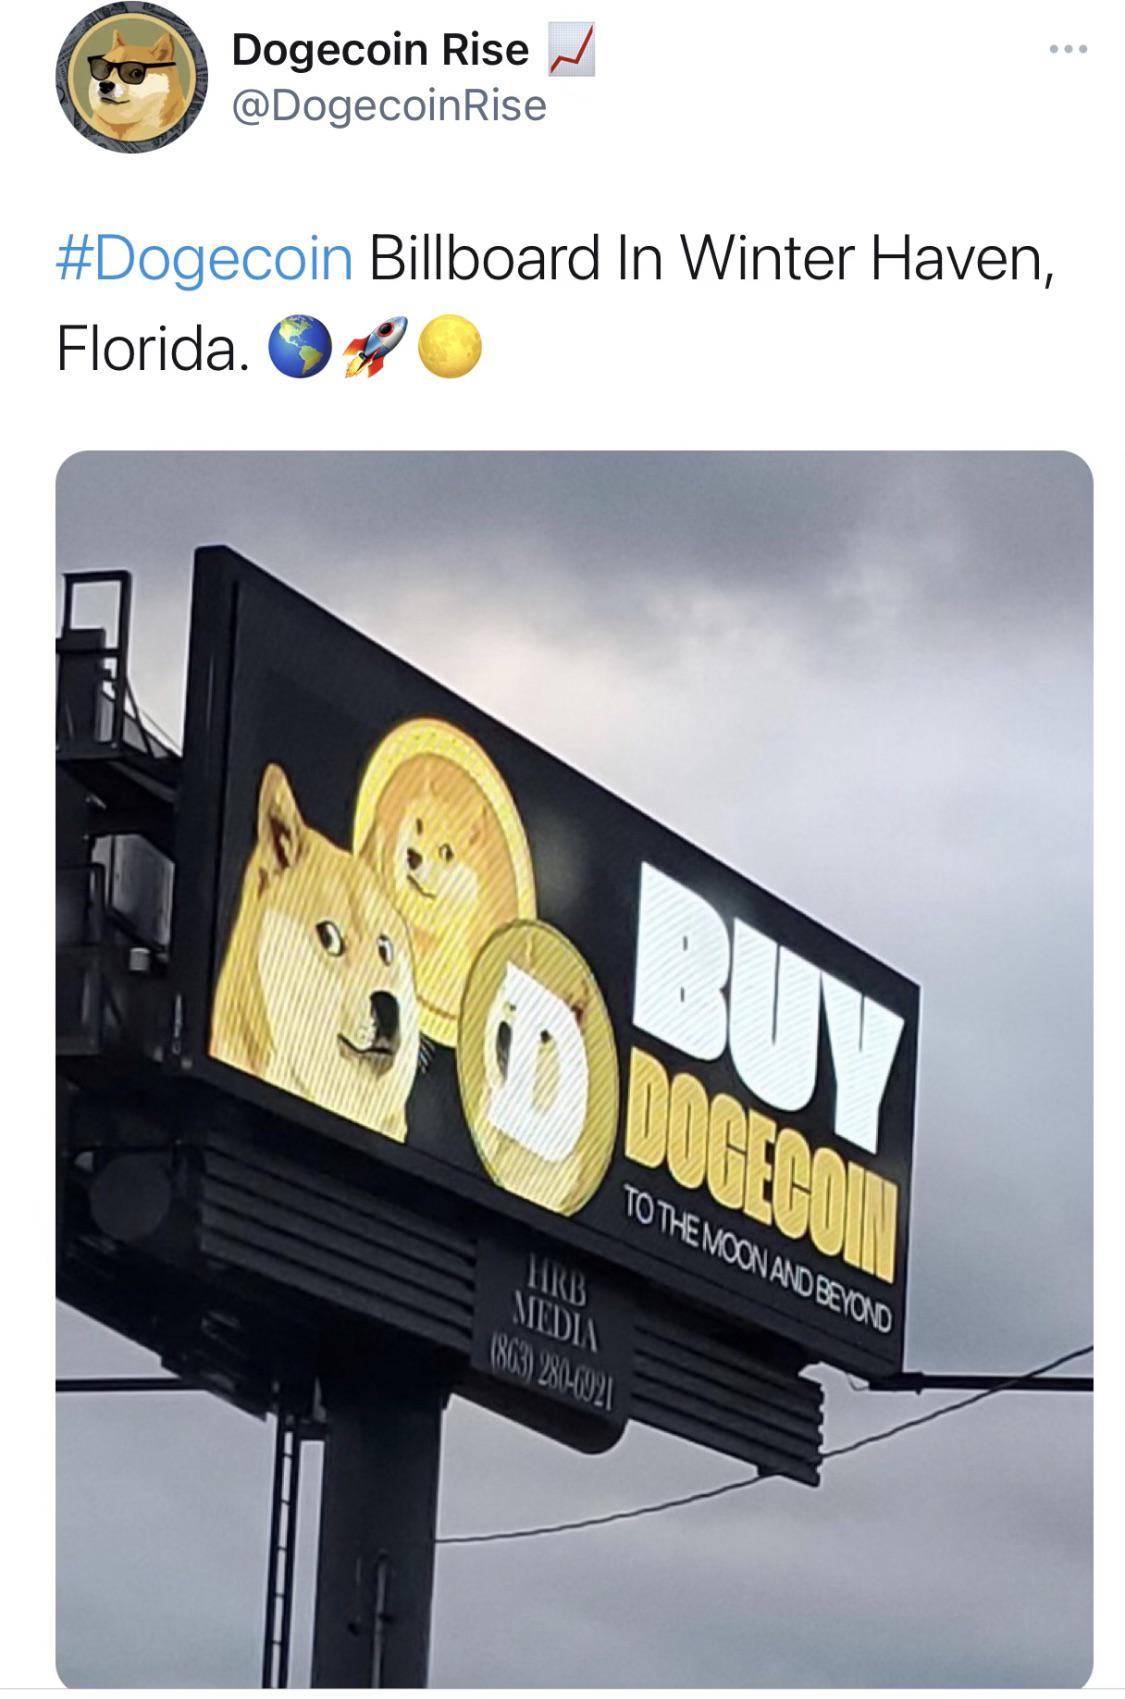 display advertising - Dogecoin Rise Billboard In Winter Haven, Florida. U Doceso To The Moon And Beyond Media 1803 280002